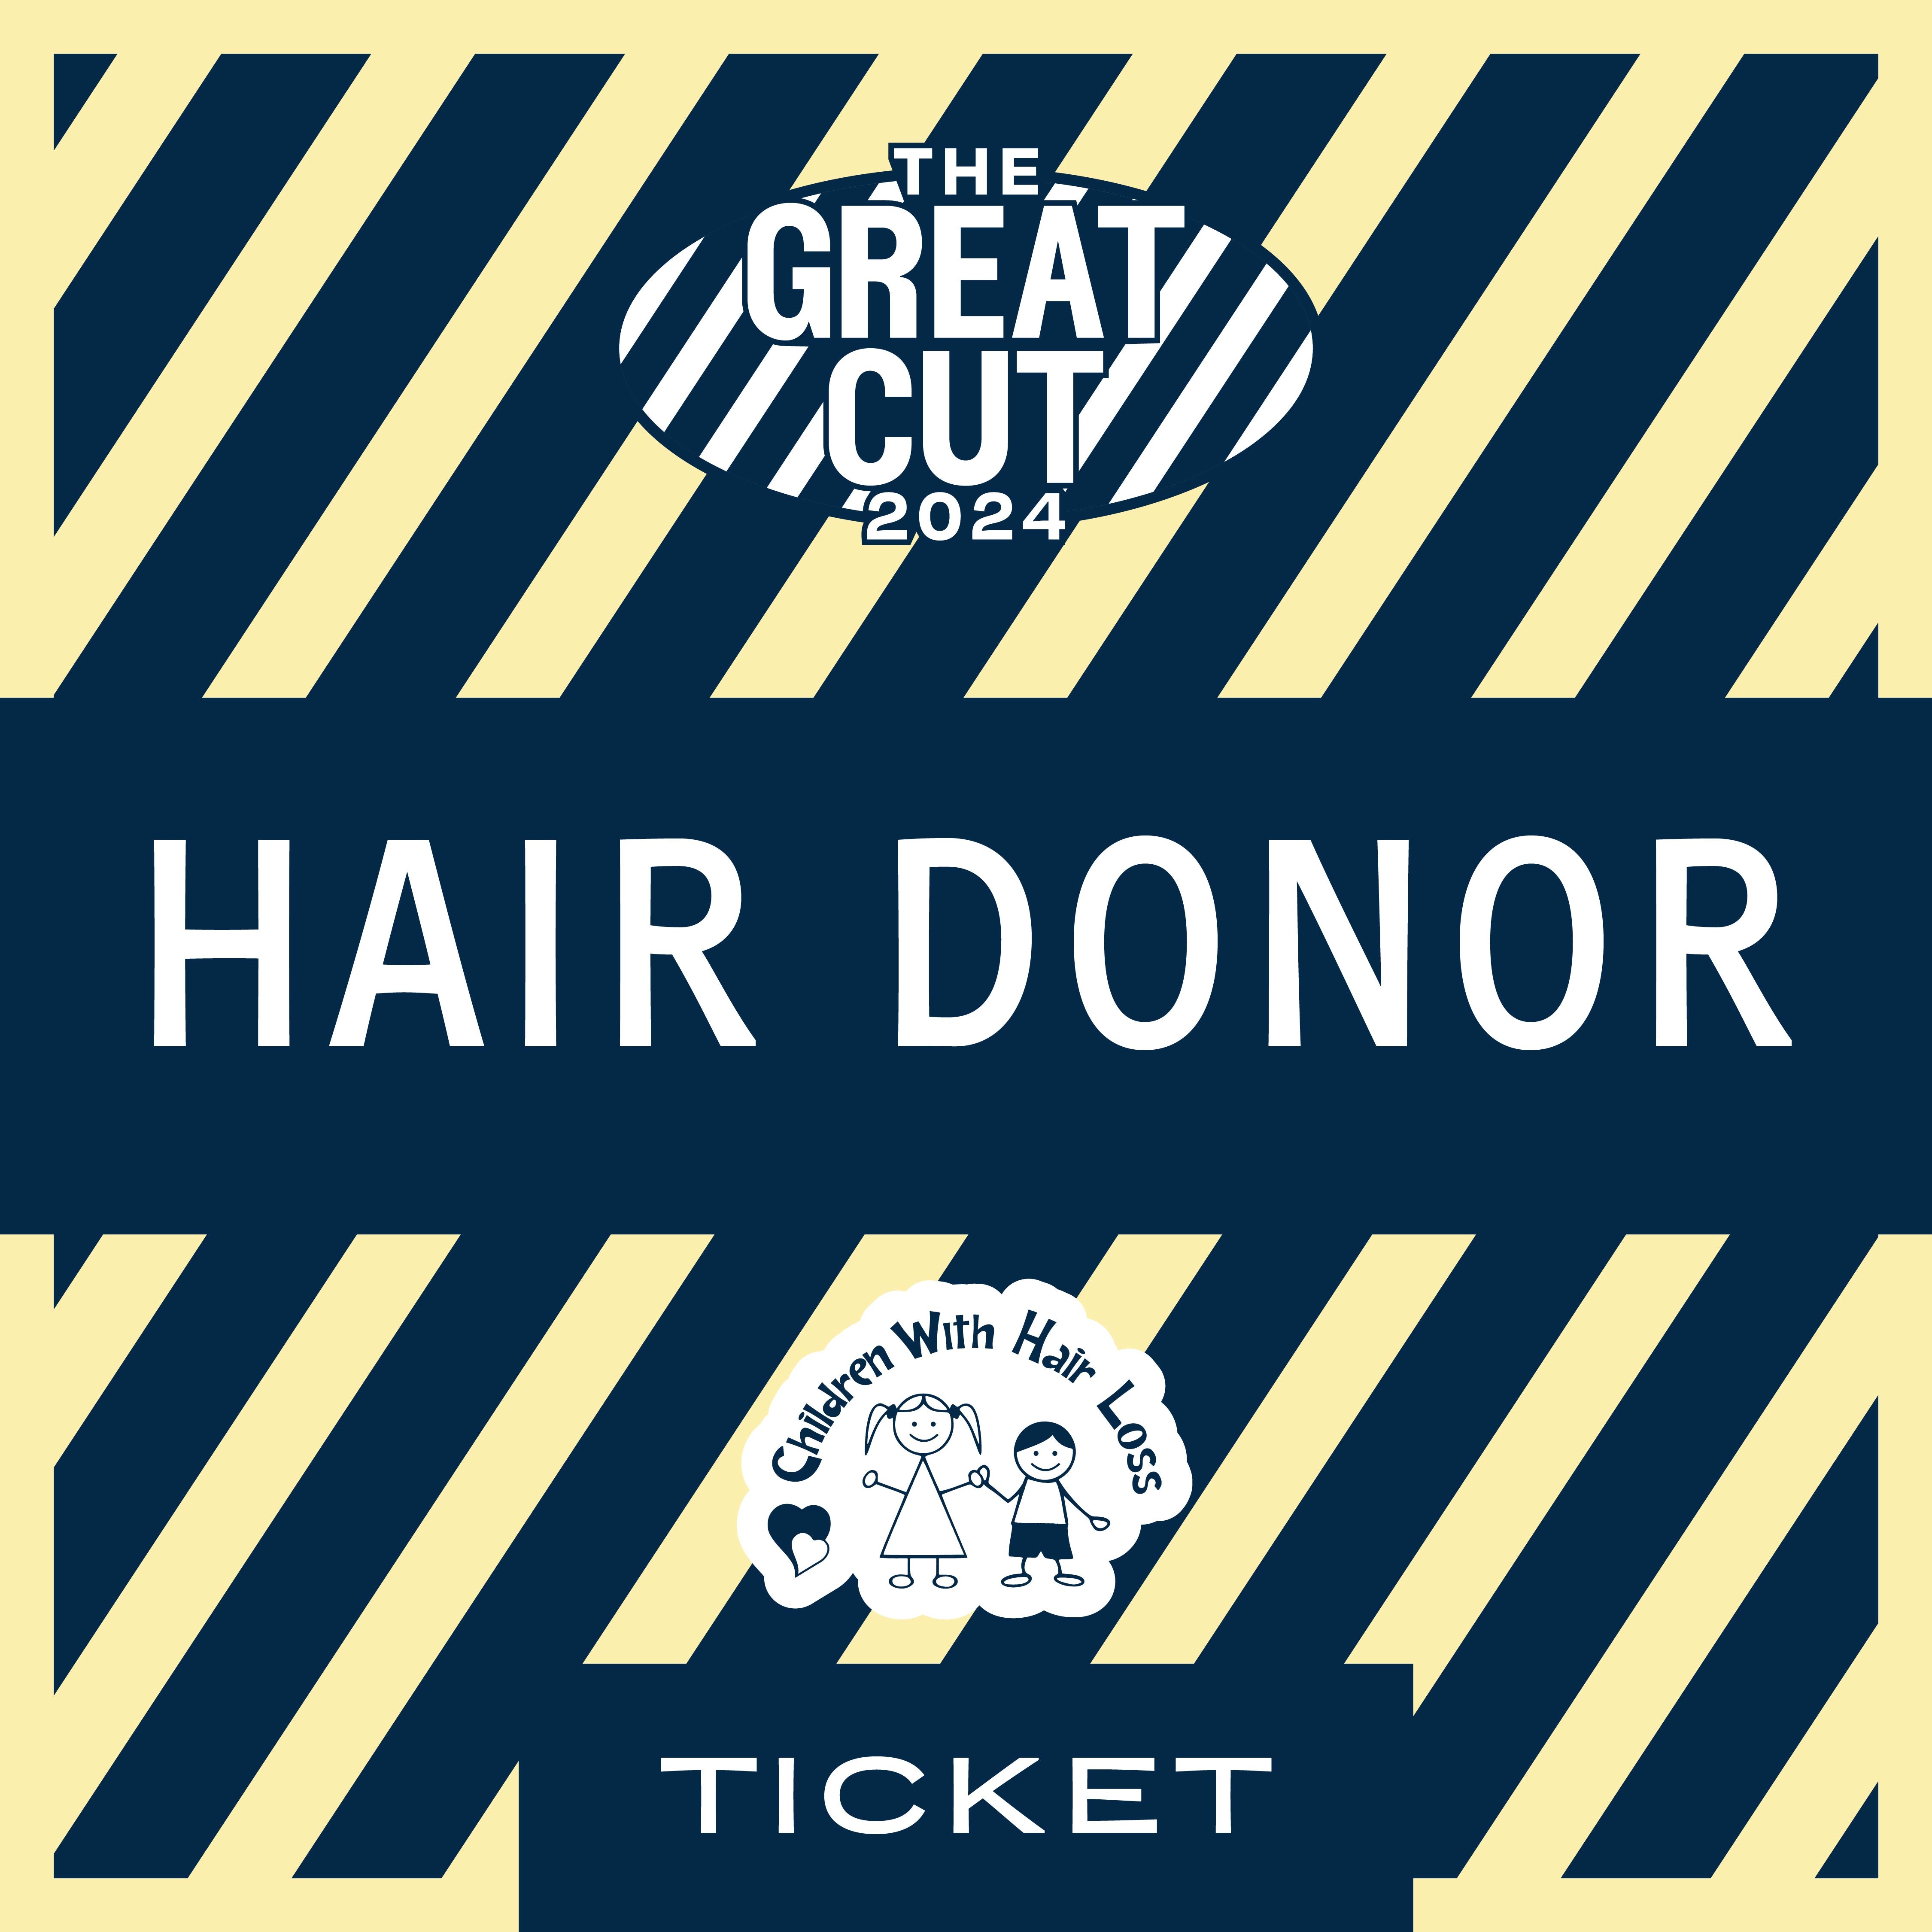 Tickets for The Great Cut